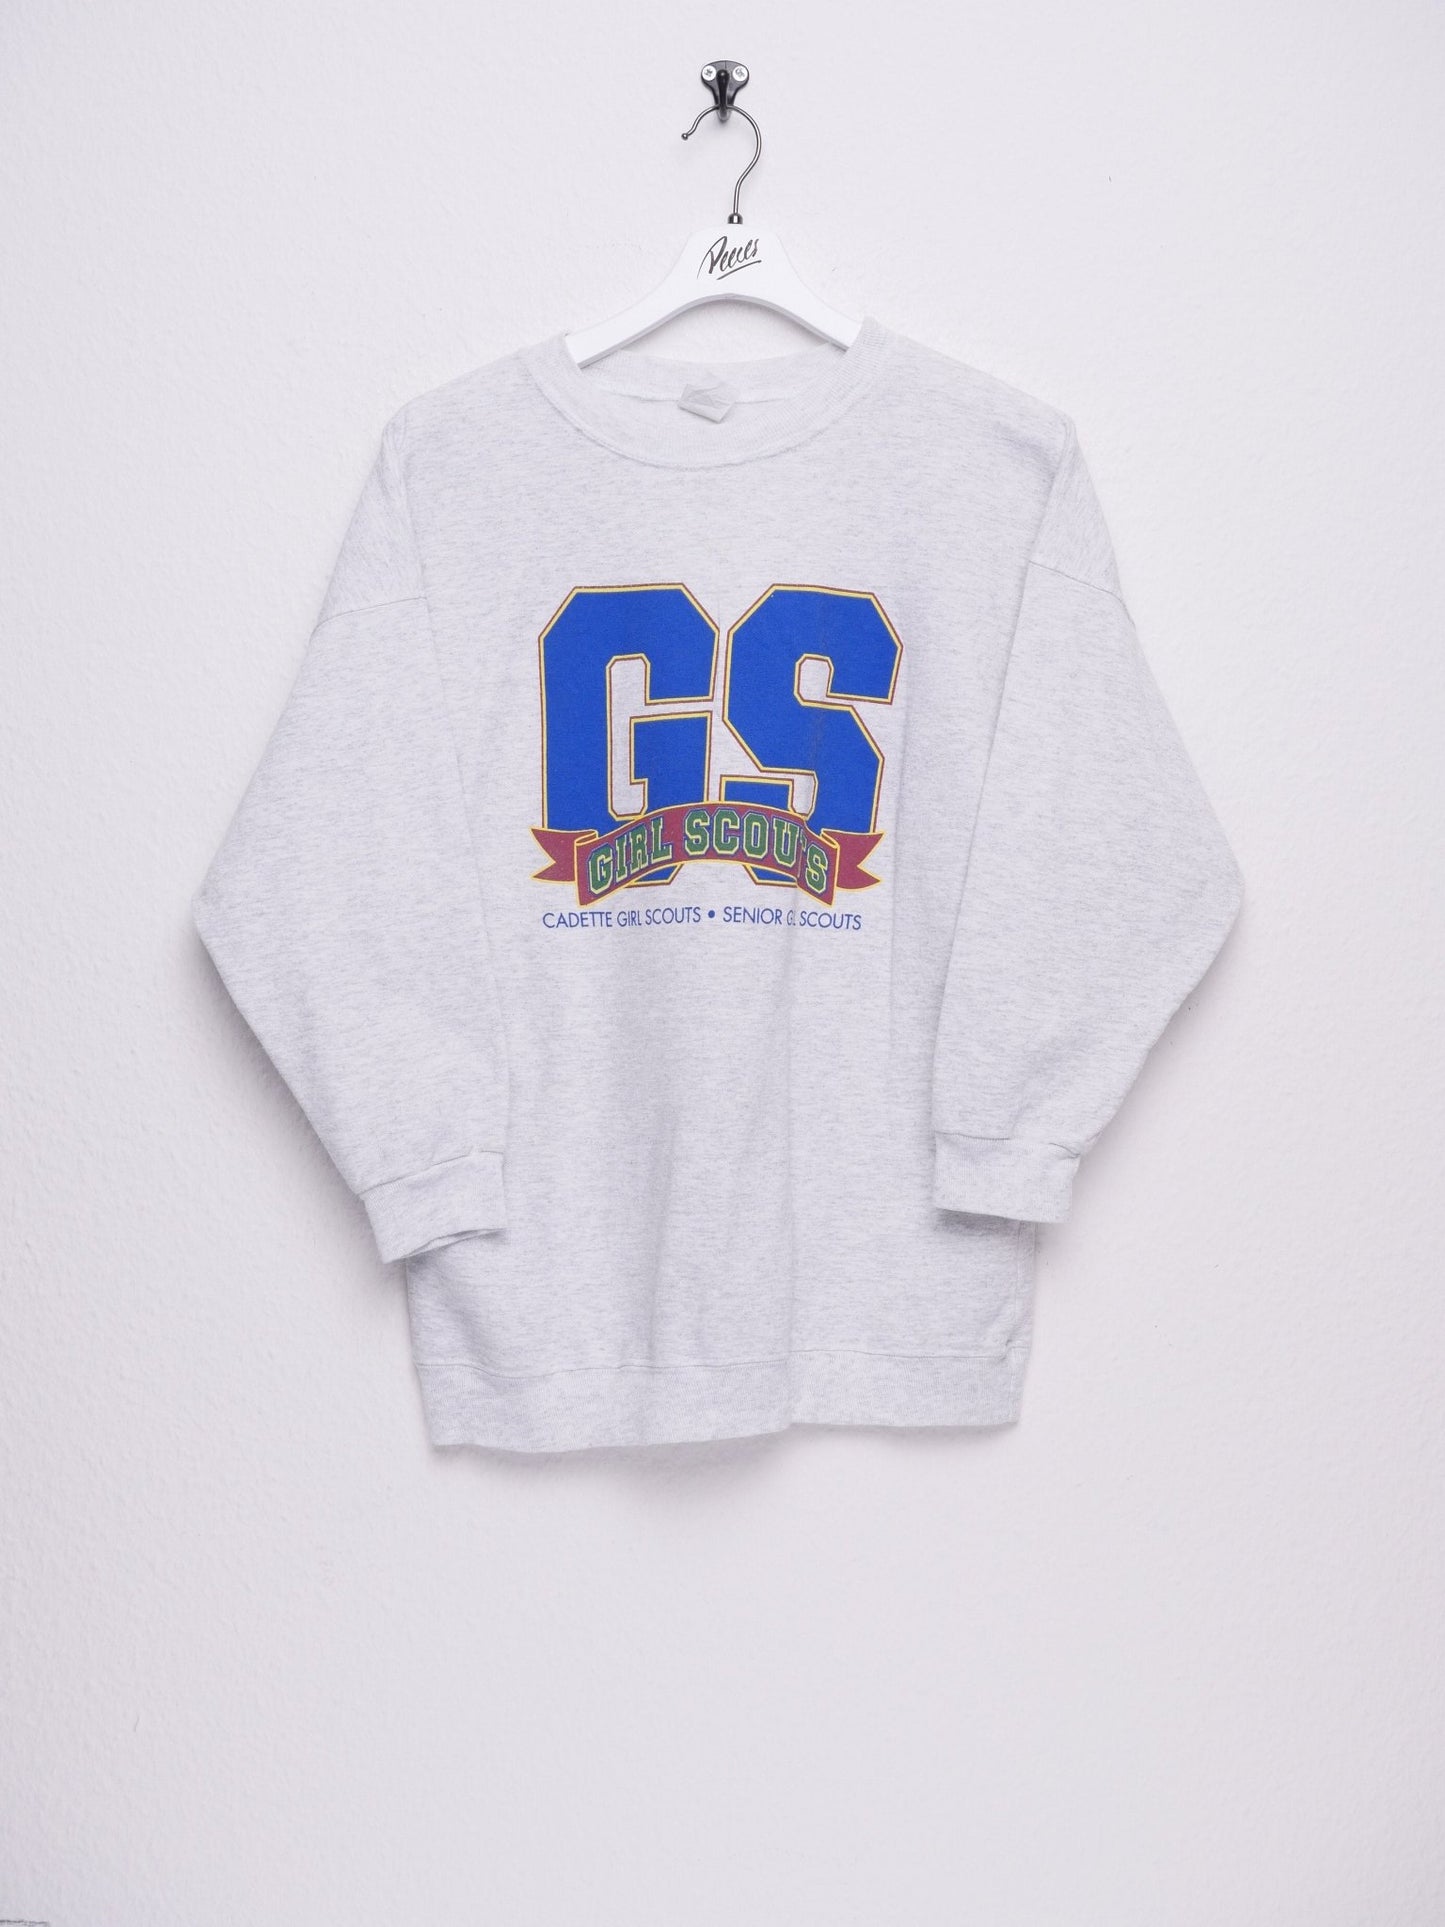 Girl Scouts printed Logo Vintage Sweater - Peeces